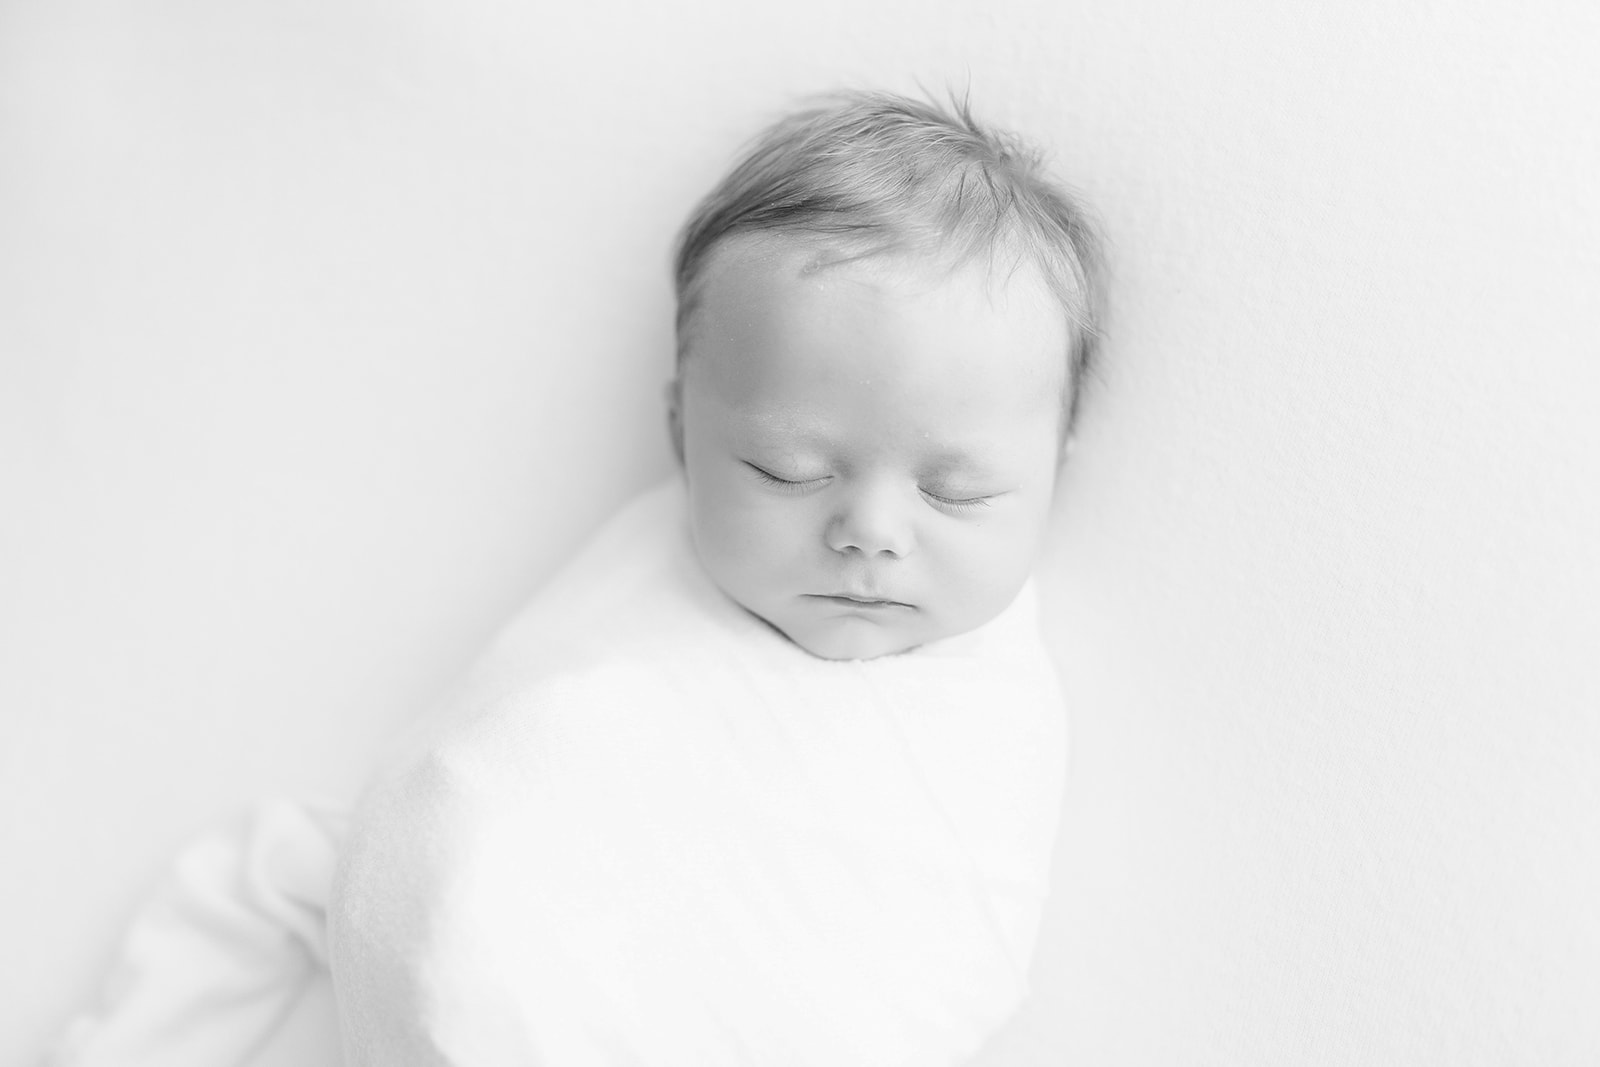 A newborn baby sleeps in a white swaddle